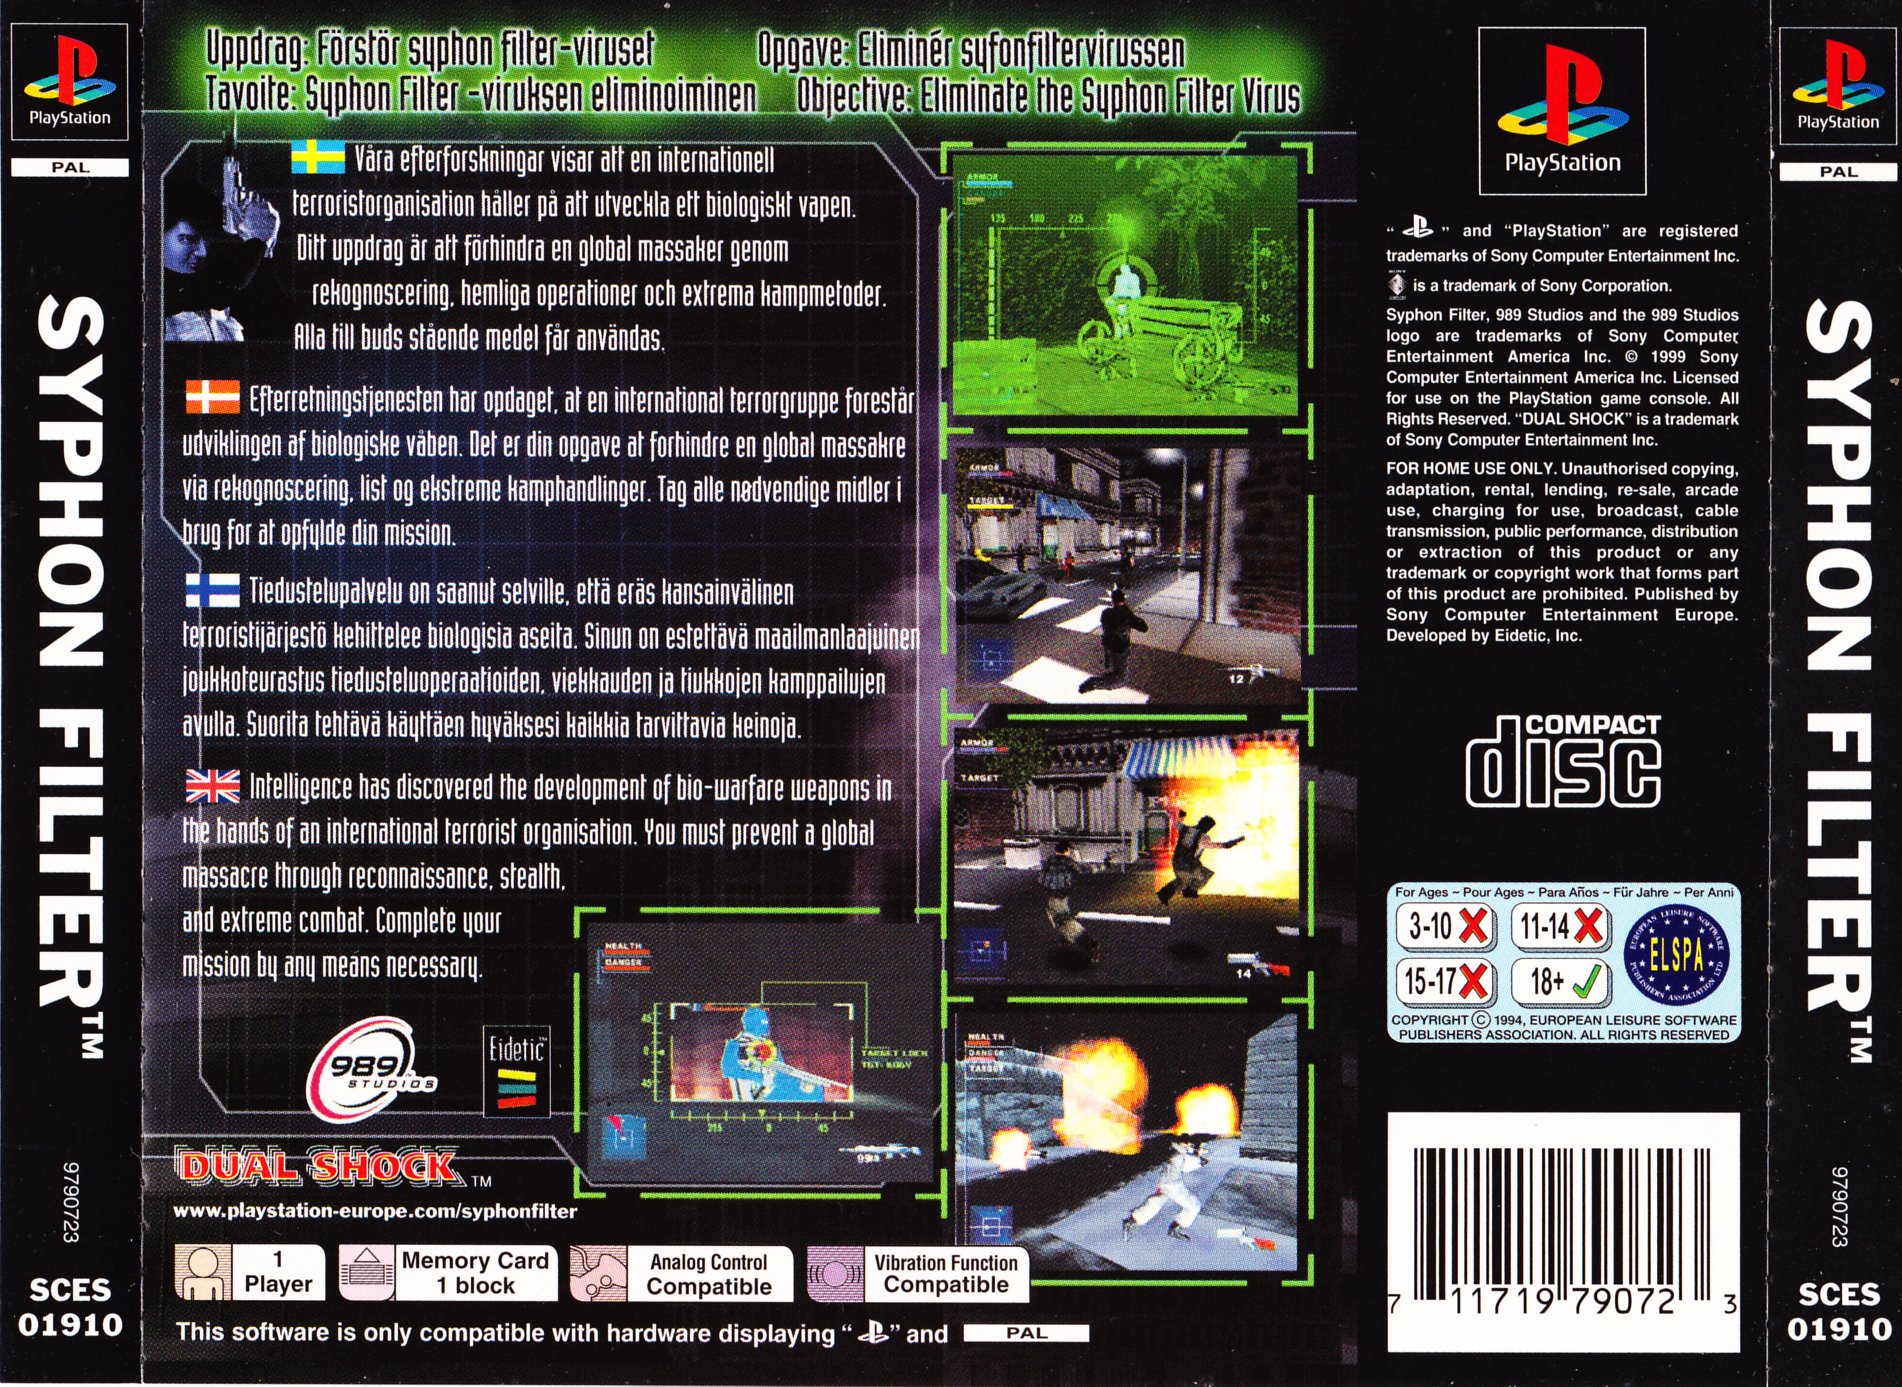 Syphon Filter PSX cover